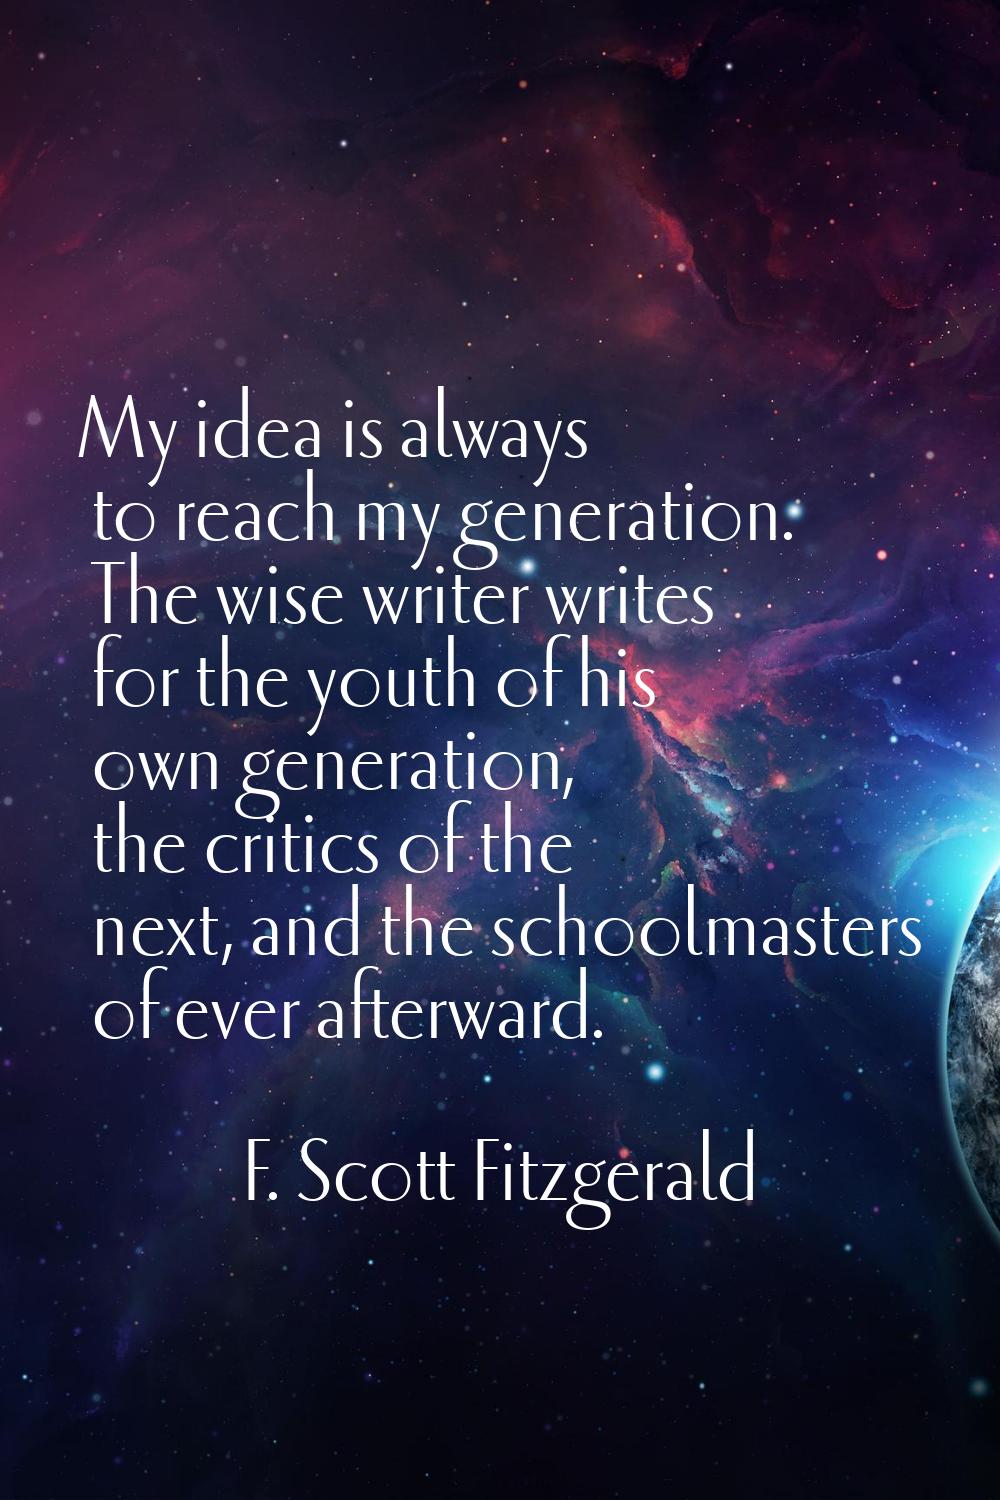 My idea is always to reach my generation. The wise writer writes for the youth of his own generatio